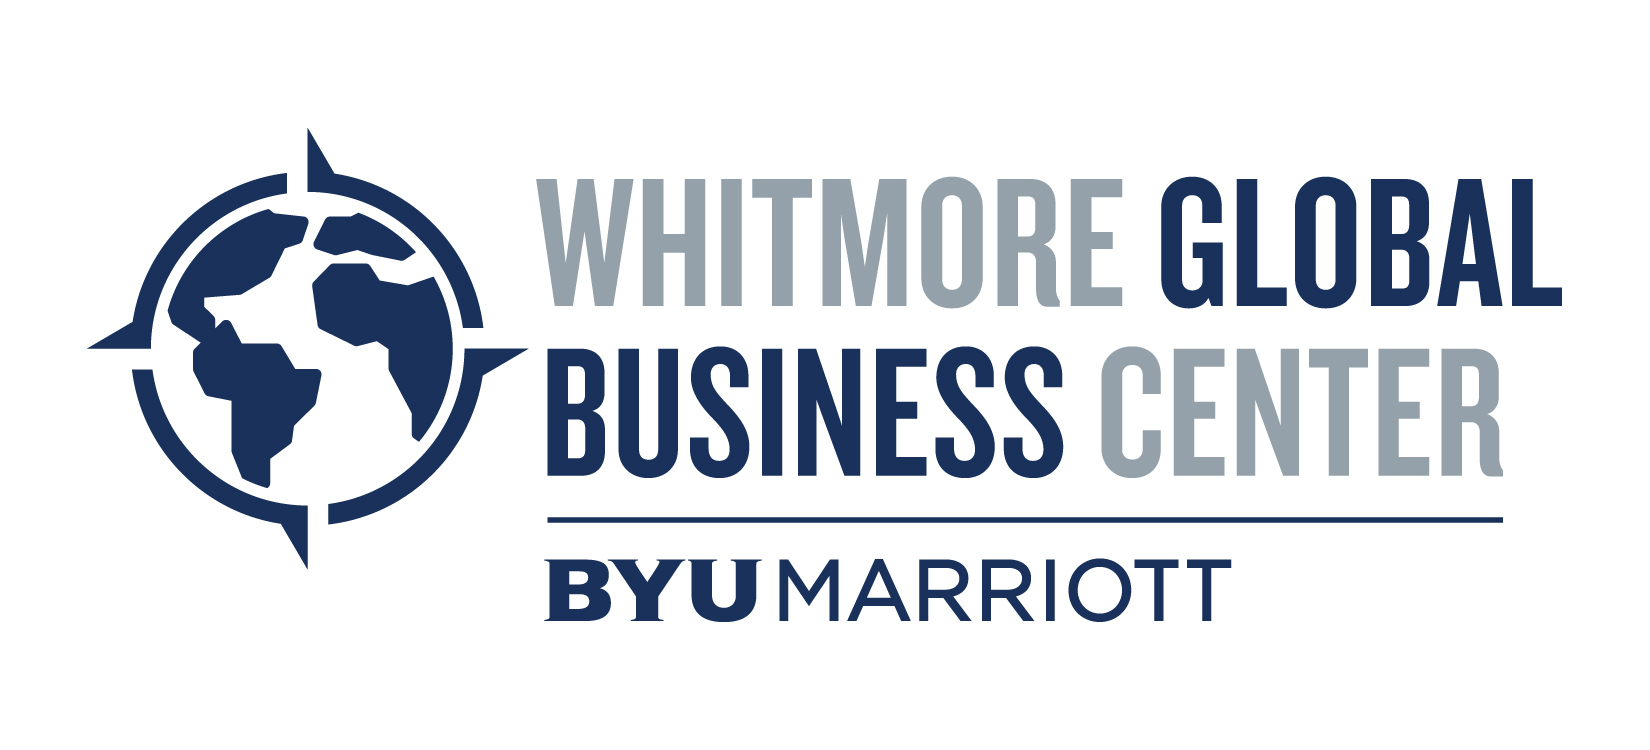 Whitmore Global Business Center